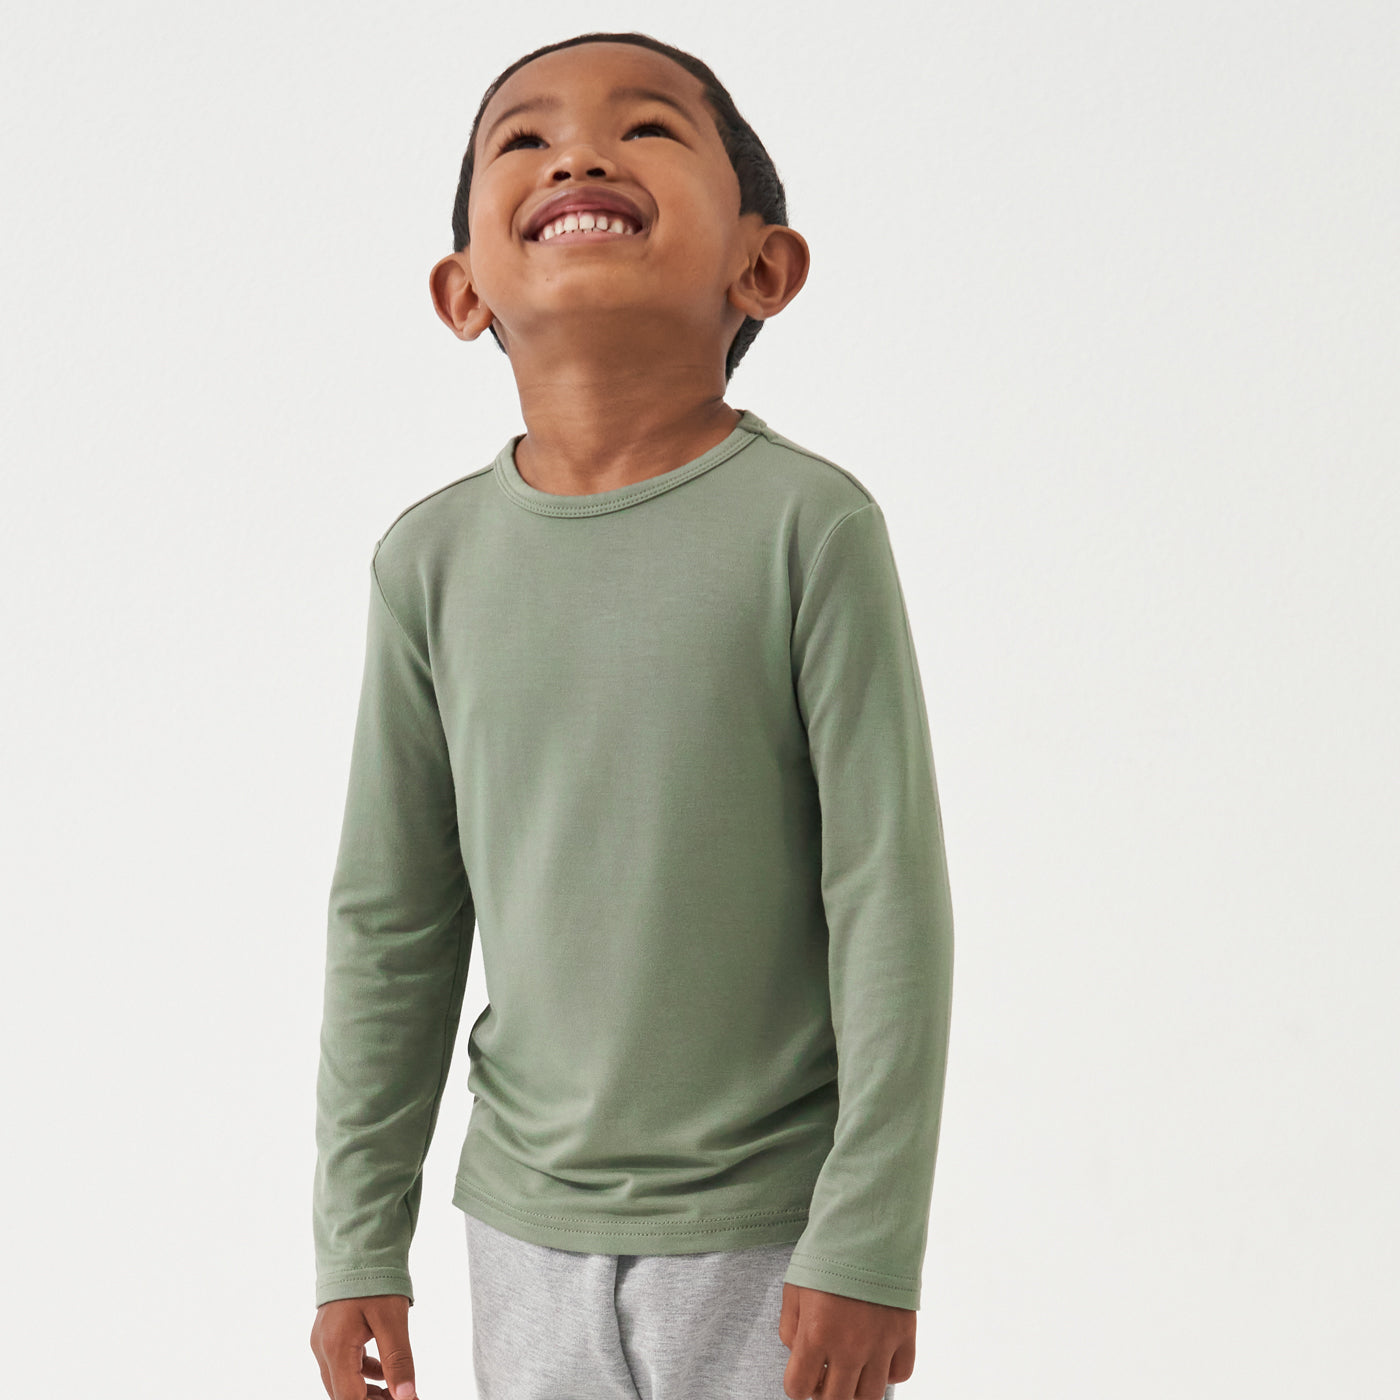 Child looking up and laughing wearing a Moss classic tee